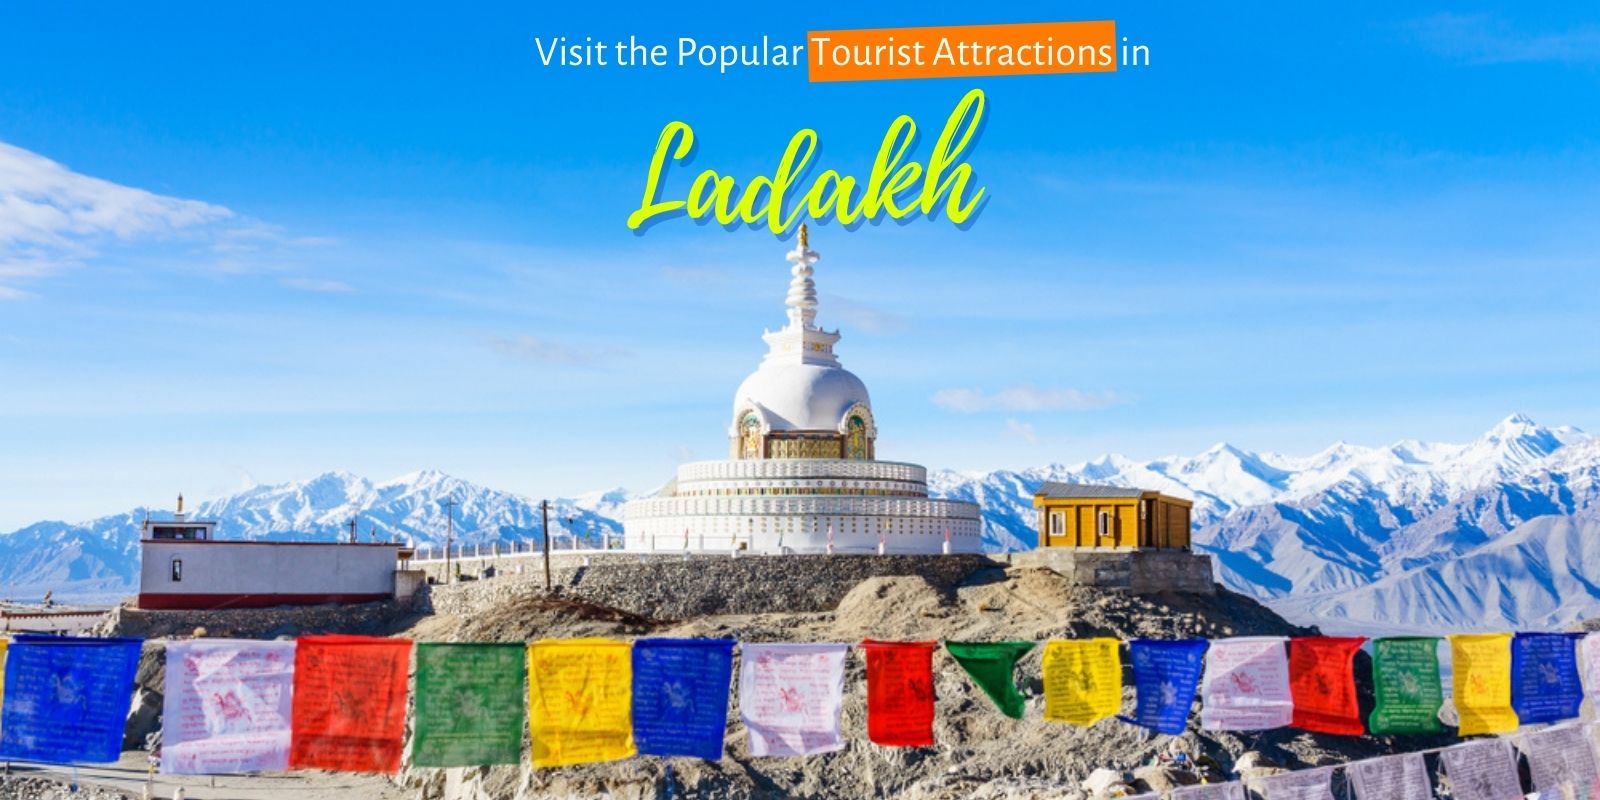 How to Visit the Popular Tourist Attractions in Ladakh?